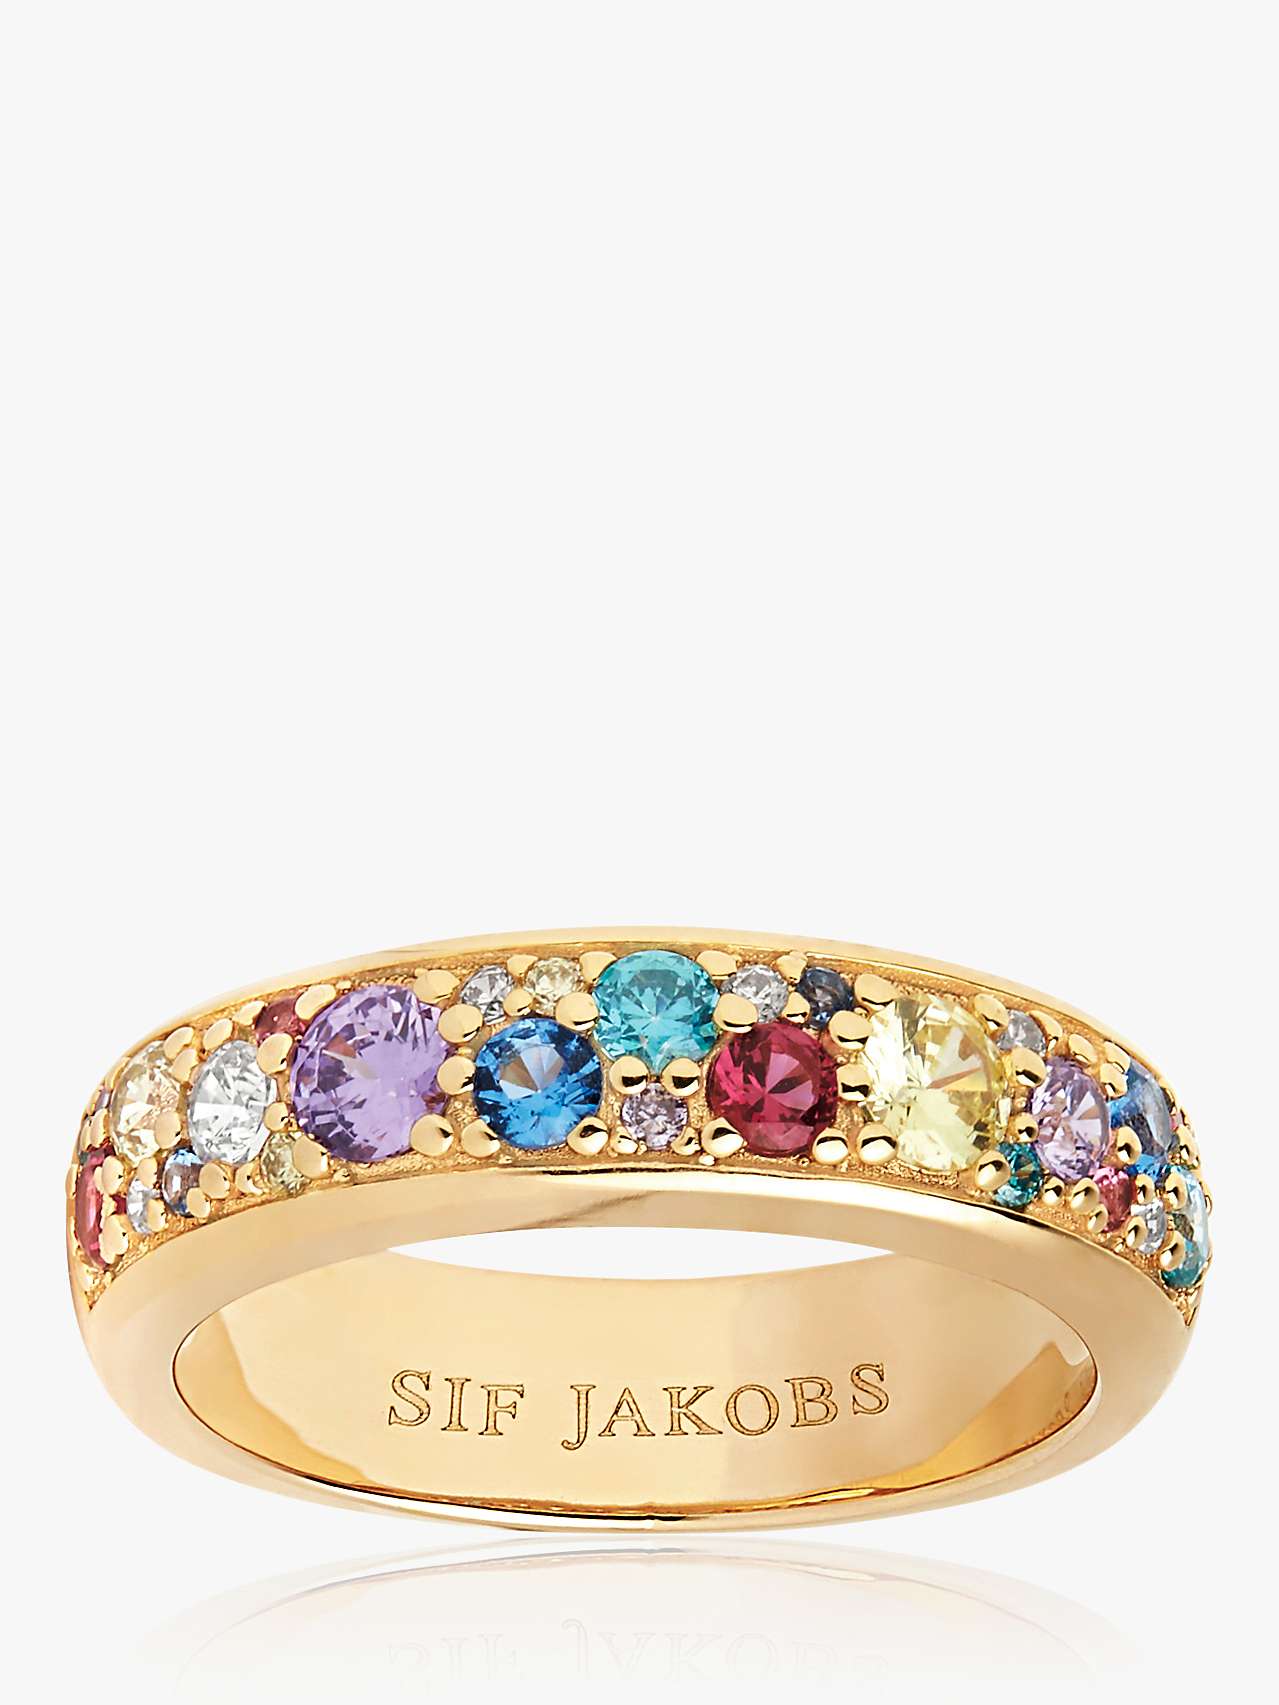 Buy Sif Jakobs Jewellery Cubic Zirconia Wide Band Ring, Gold/Multi Online at johnlewis.com